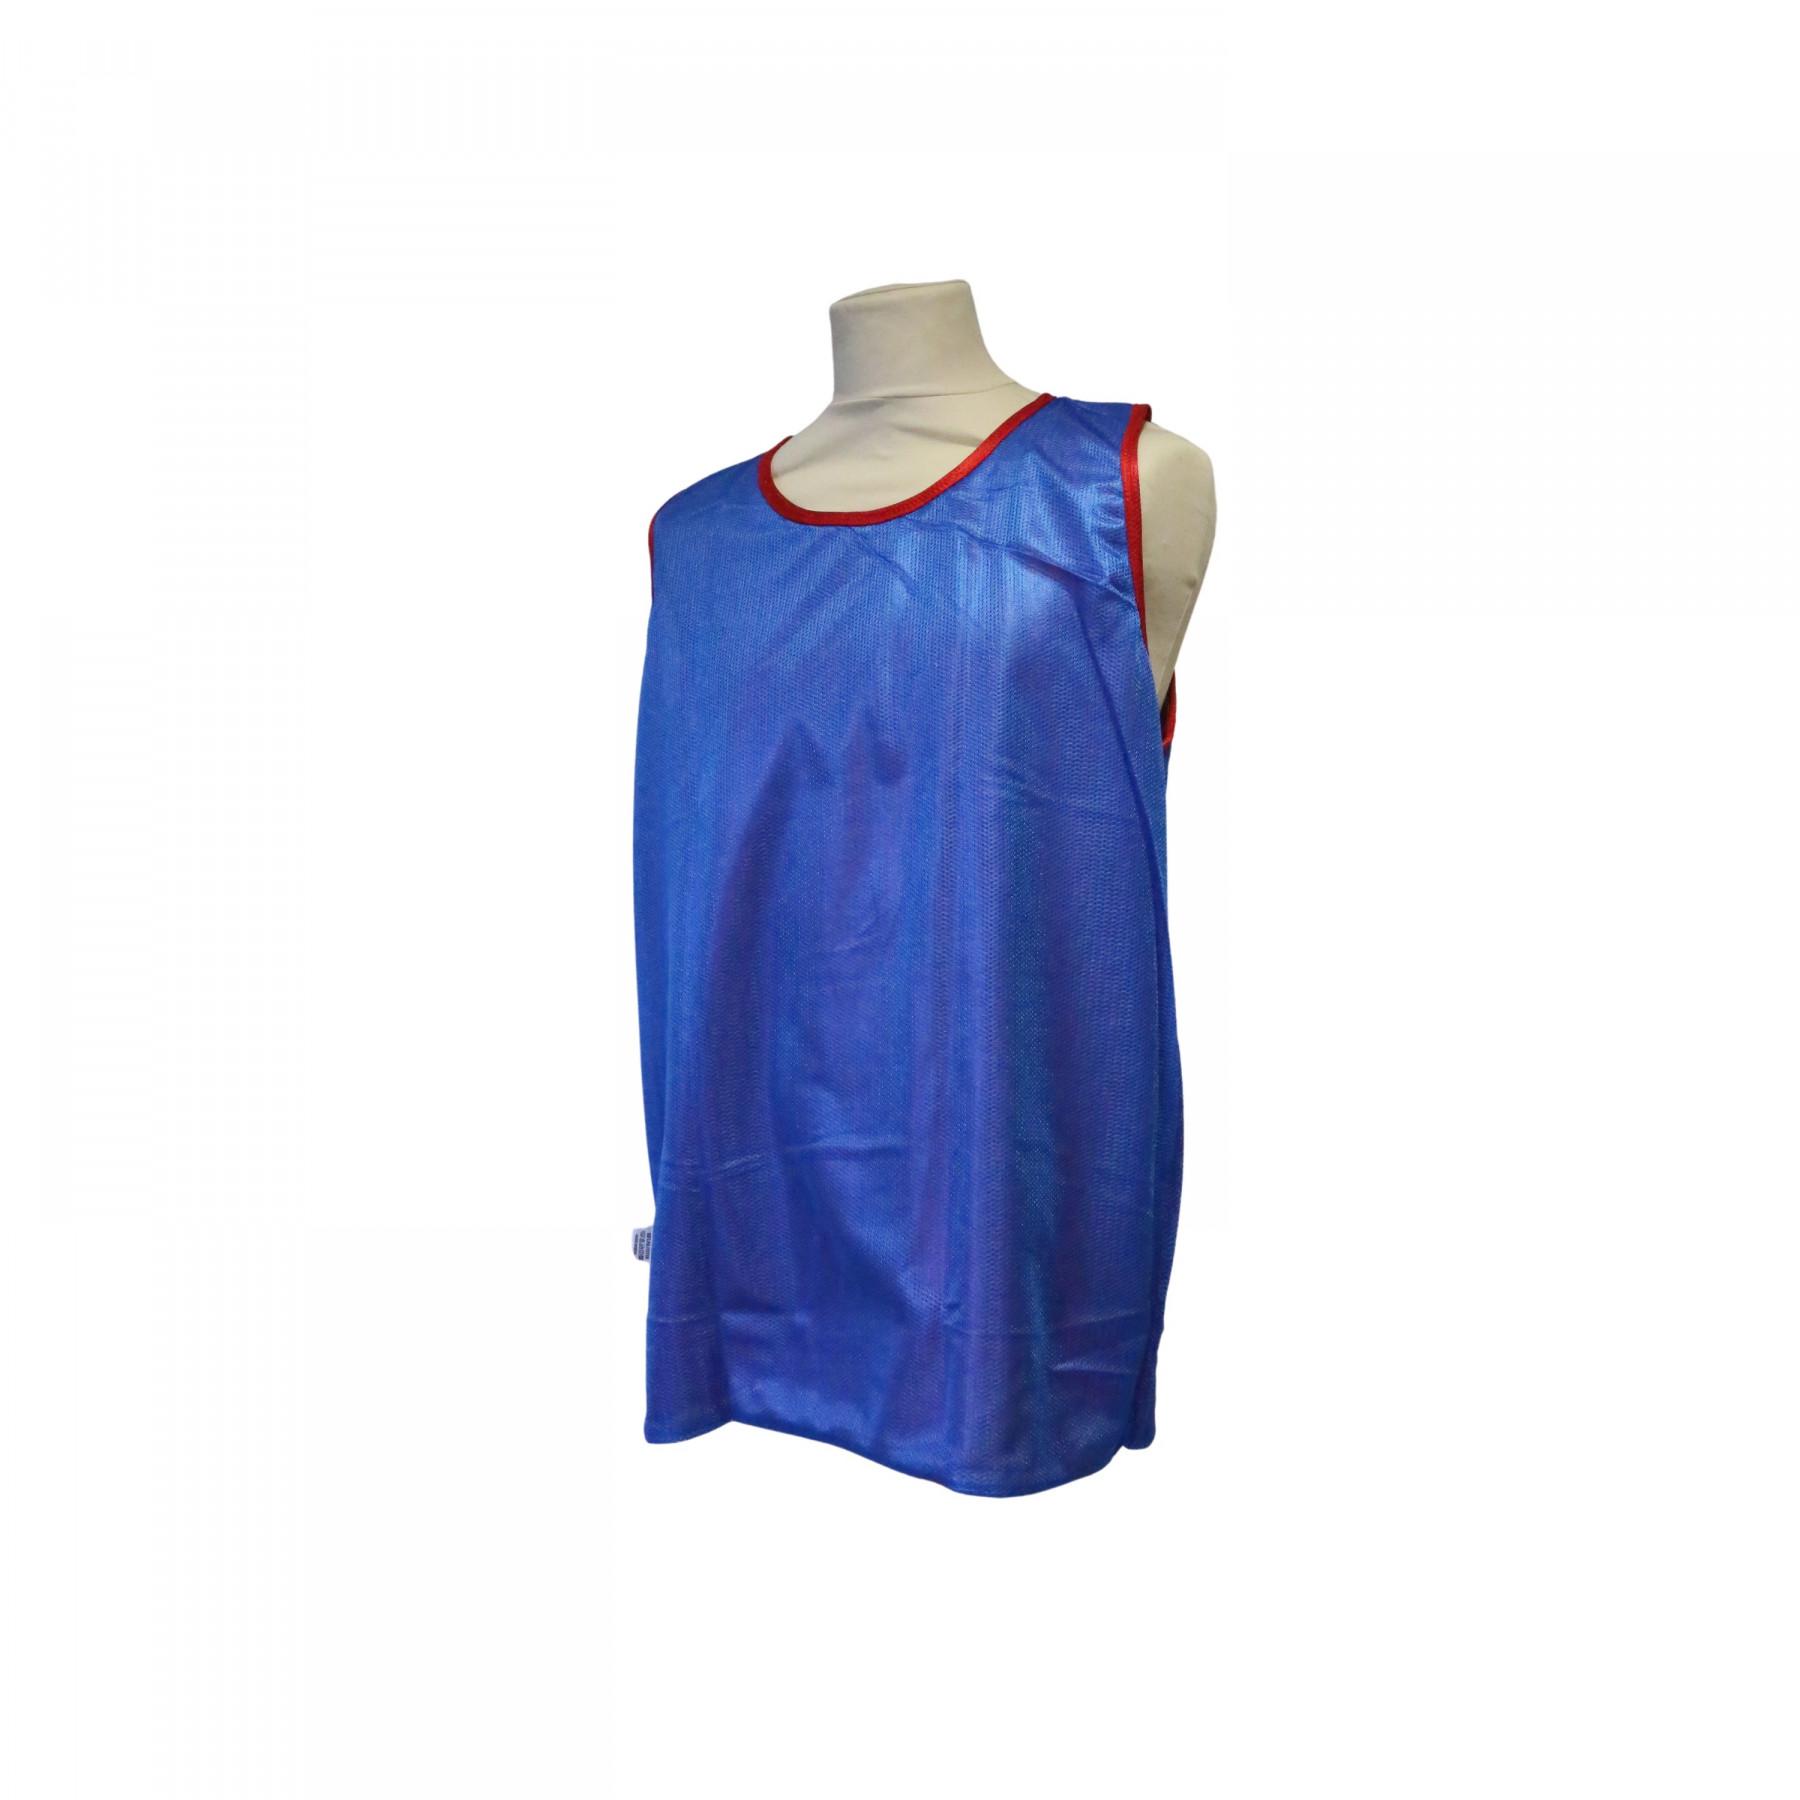 Reversible chasuble